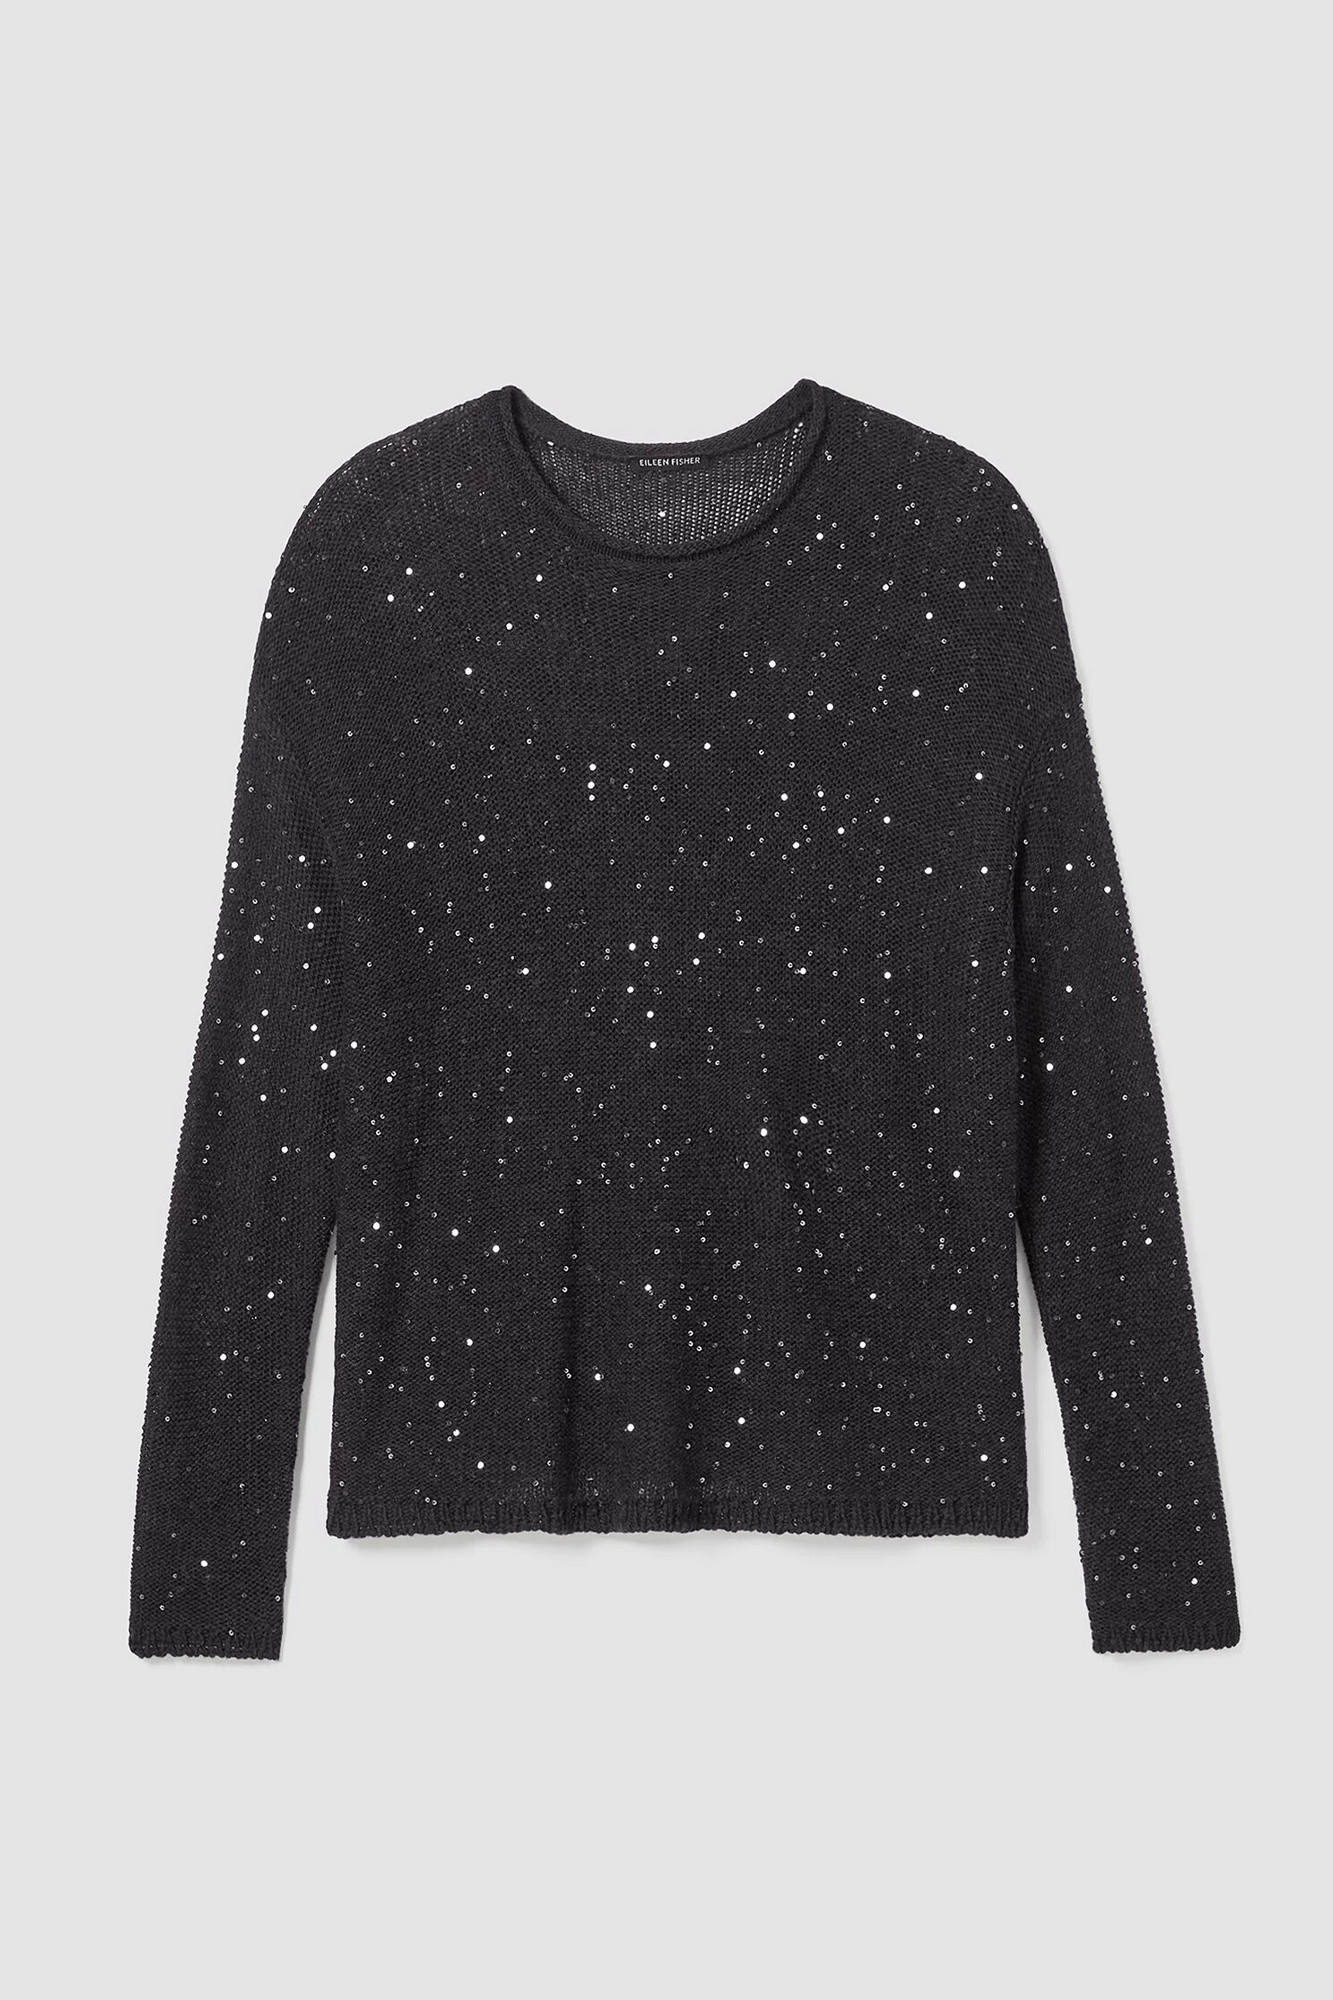 Look effortlessly stylish with our Crew Neck Pullover from Eileen Fisher, featuring a classic crew neck design highlighted by shimmering sequins. Crafted from quality Merino wool, this pullover is not only soft and comfortable, but is also better for the environment thanks to the land-friendly production methods.